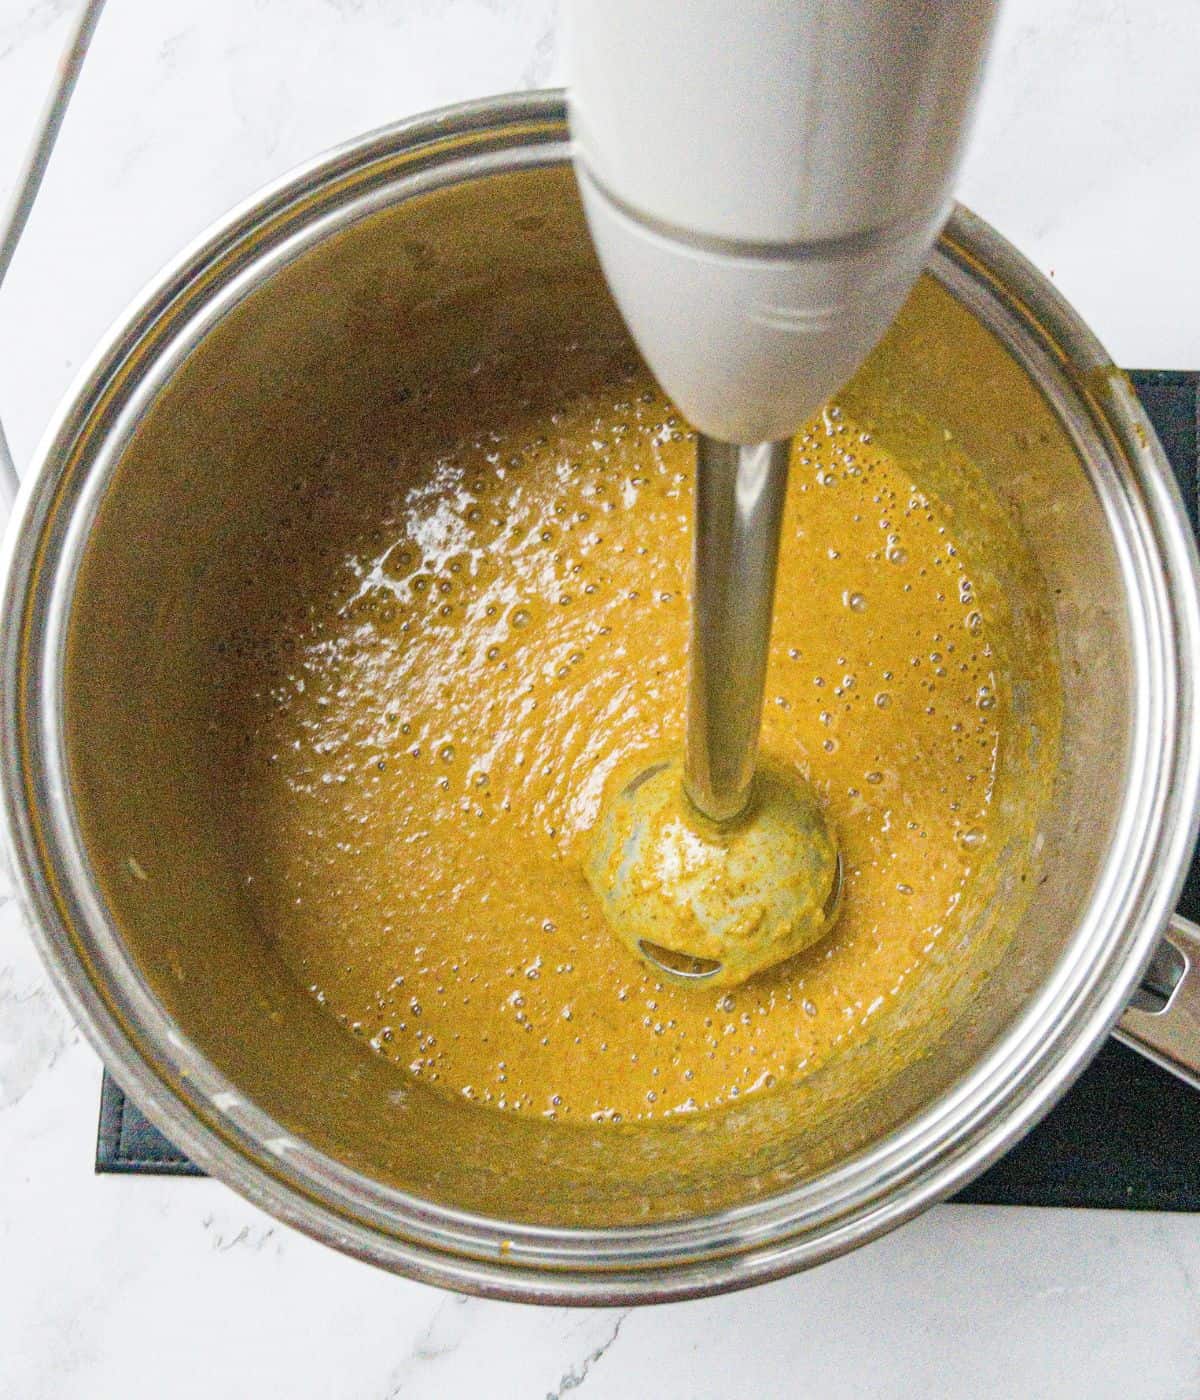 Katsu curry sauce being blended in a saucepan.